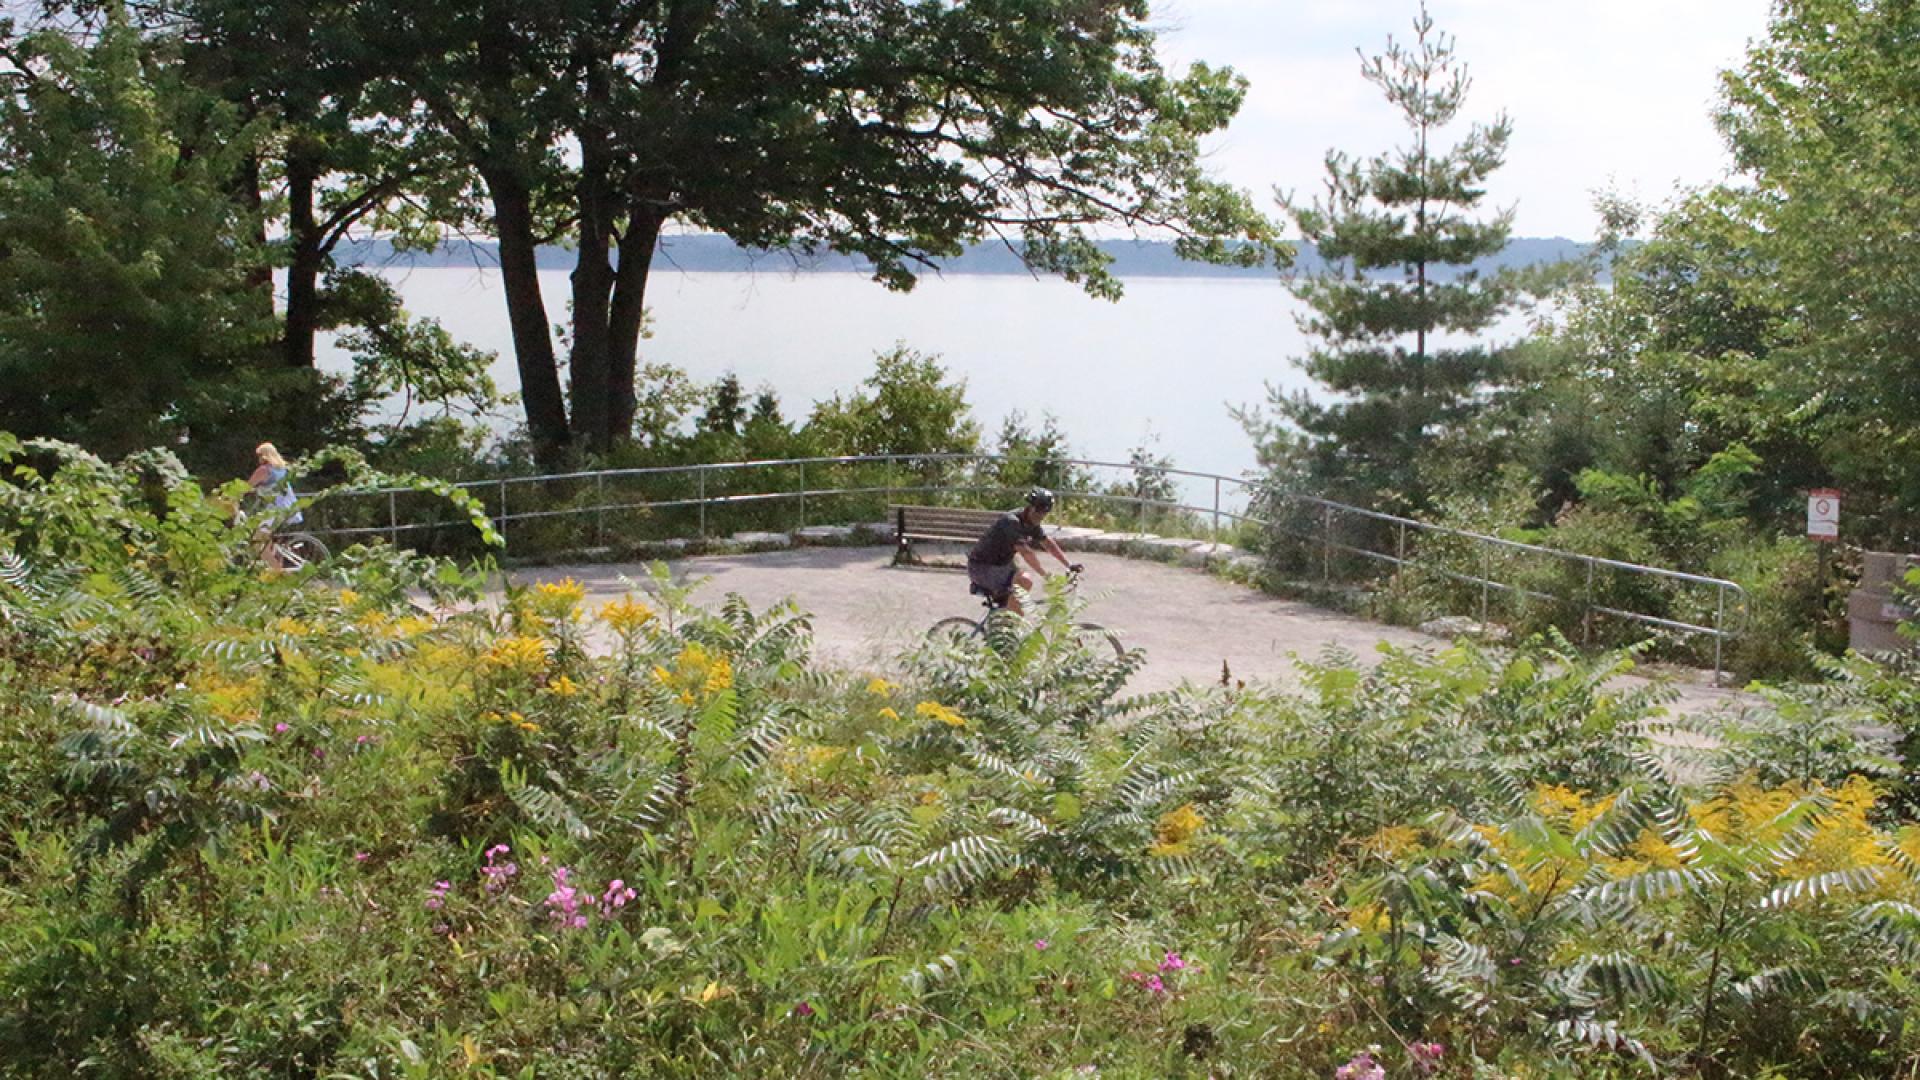 Barrie's North Shore Trail along the waterfront